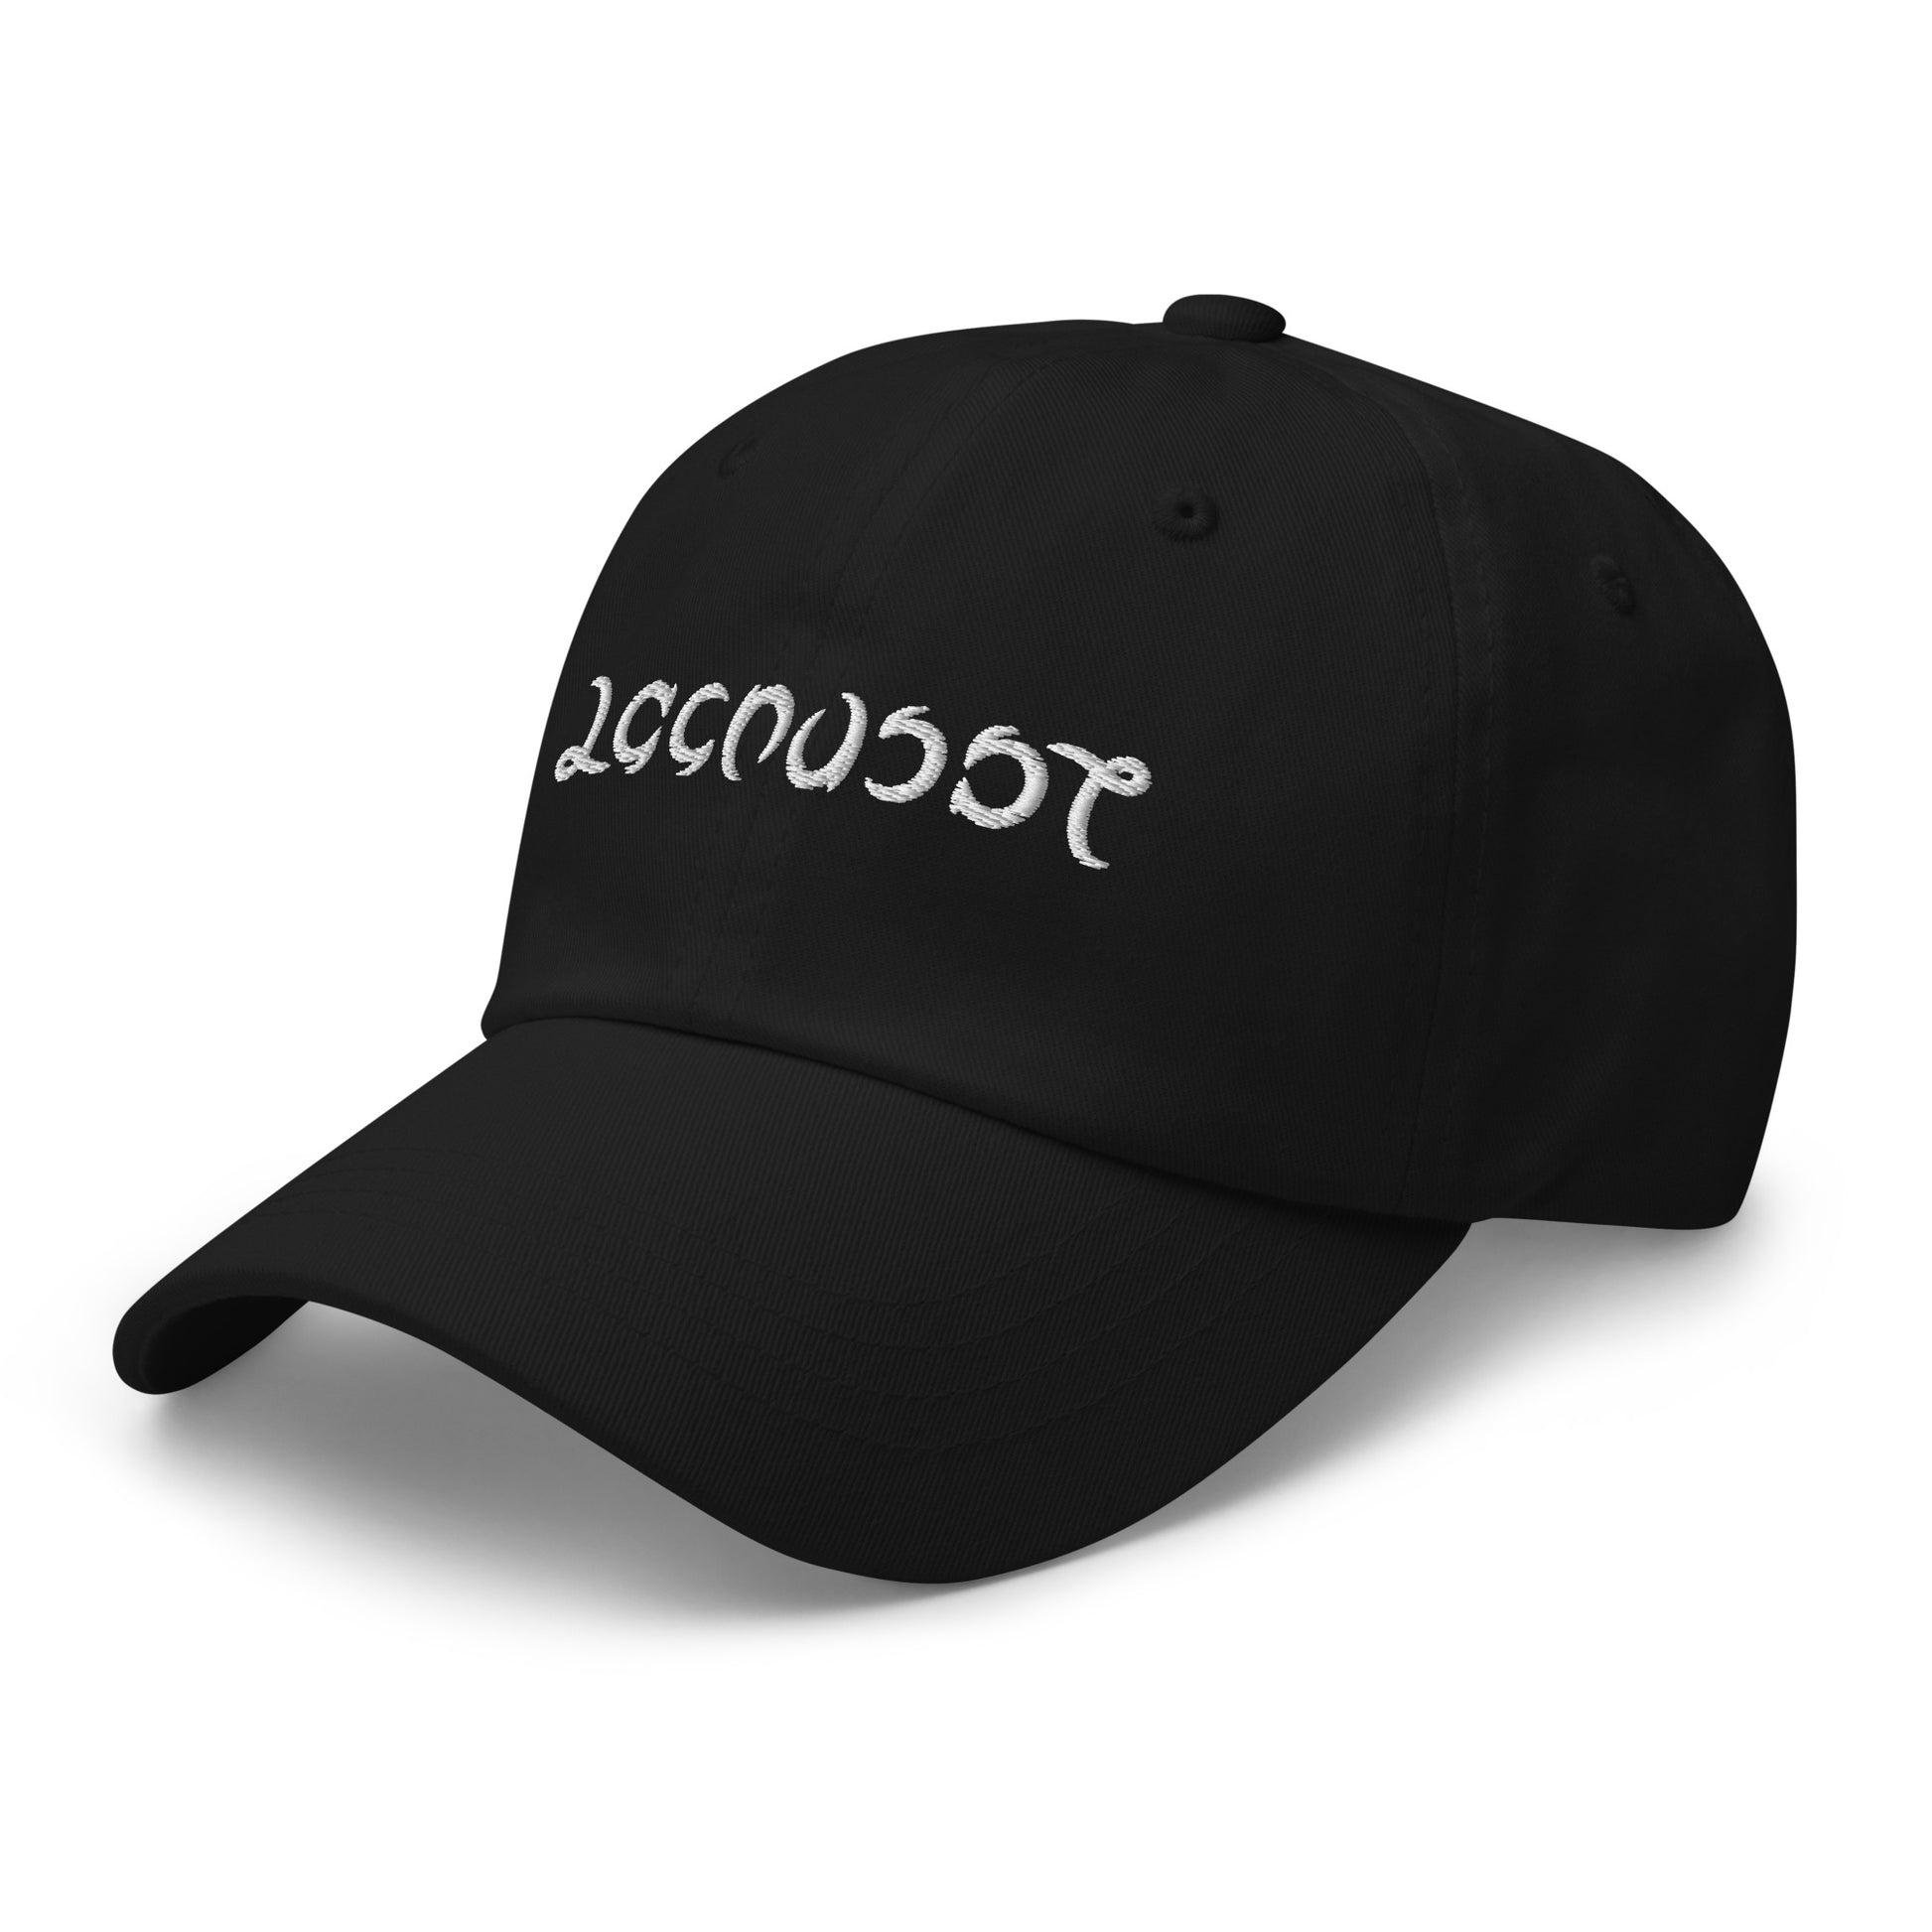 Embroidered Lacrosse Ambigram Hat